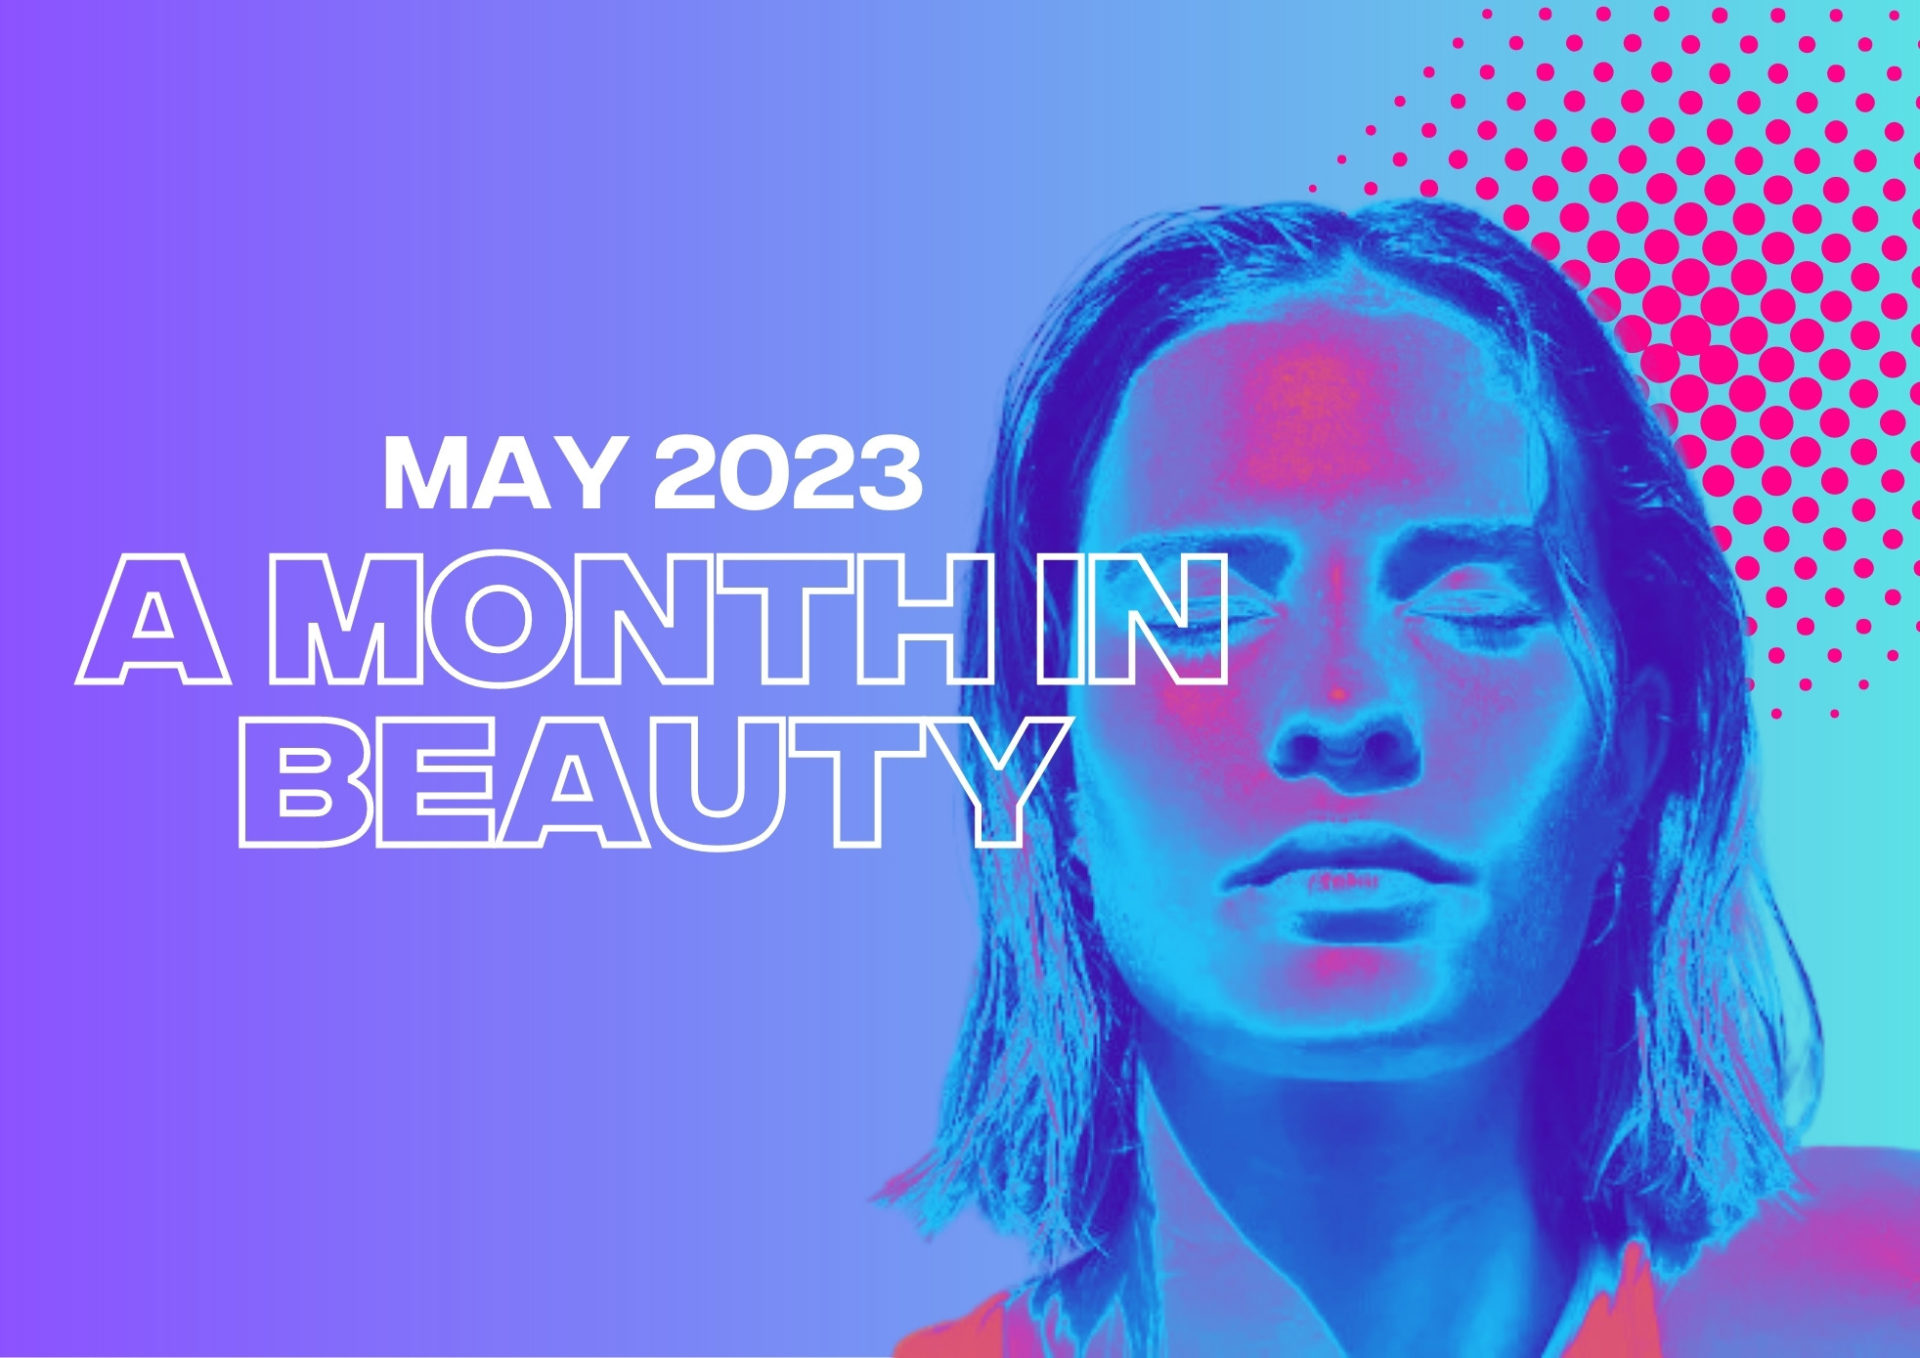 A Month in Beauty: May 2023